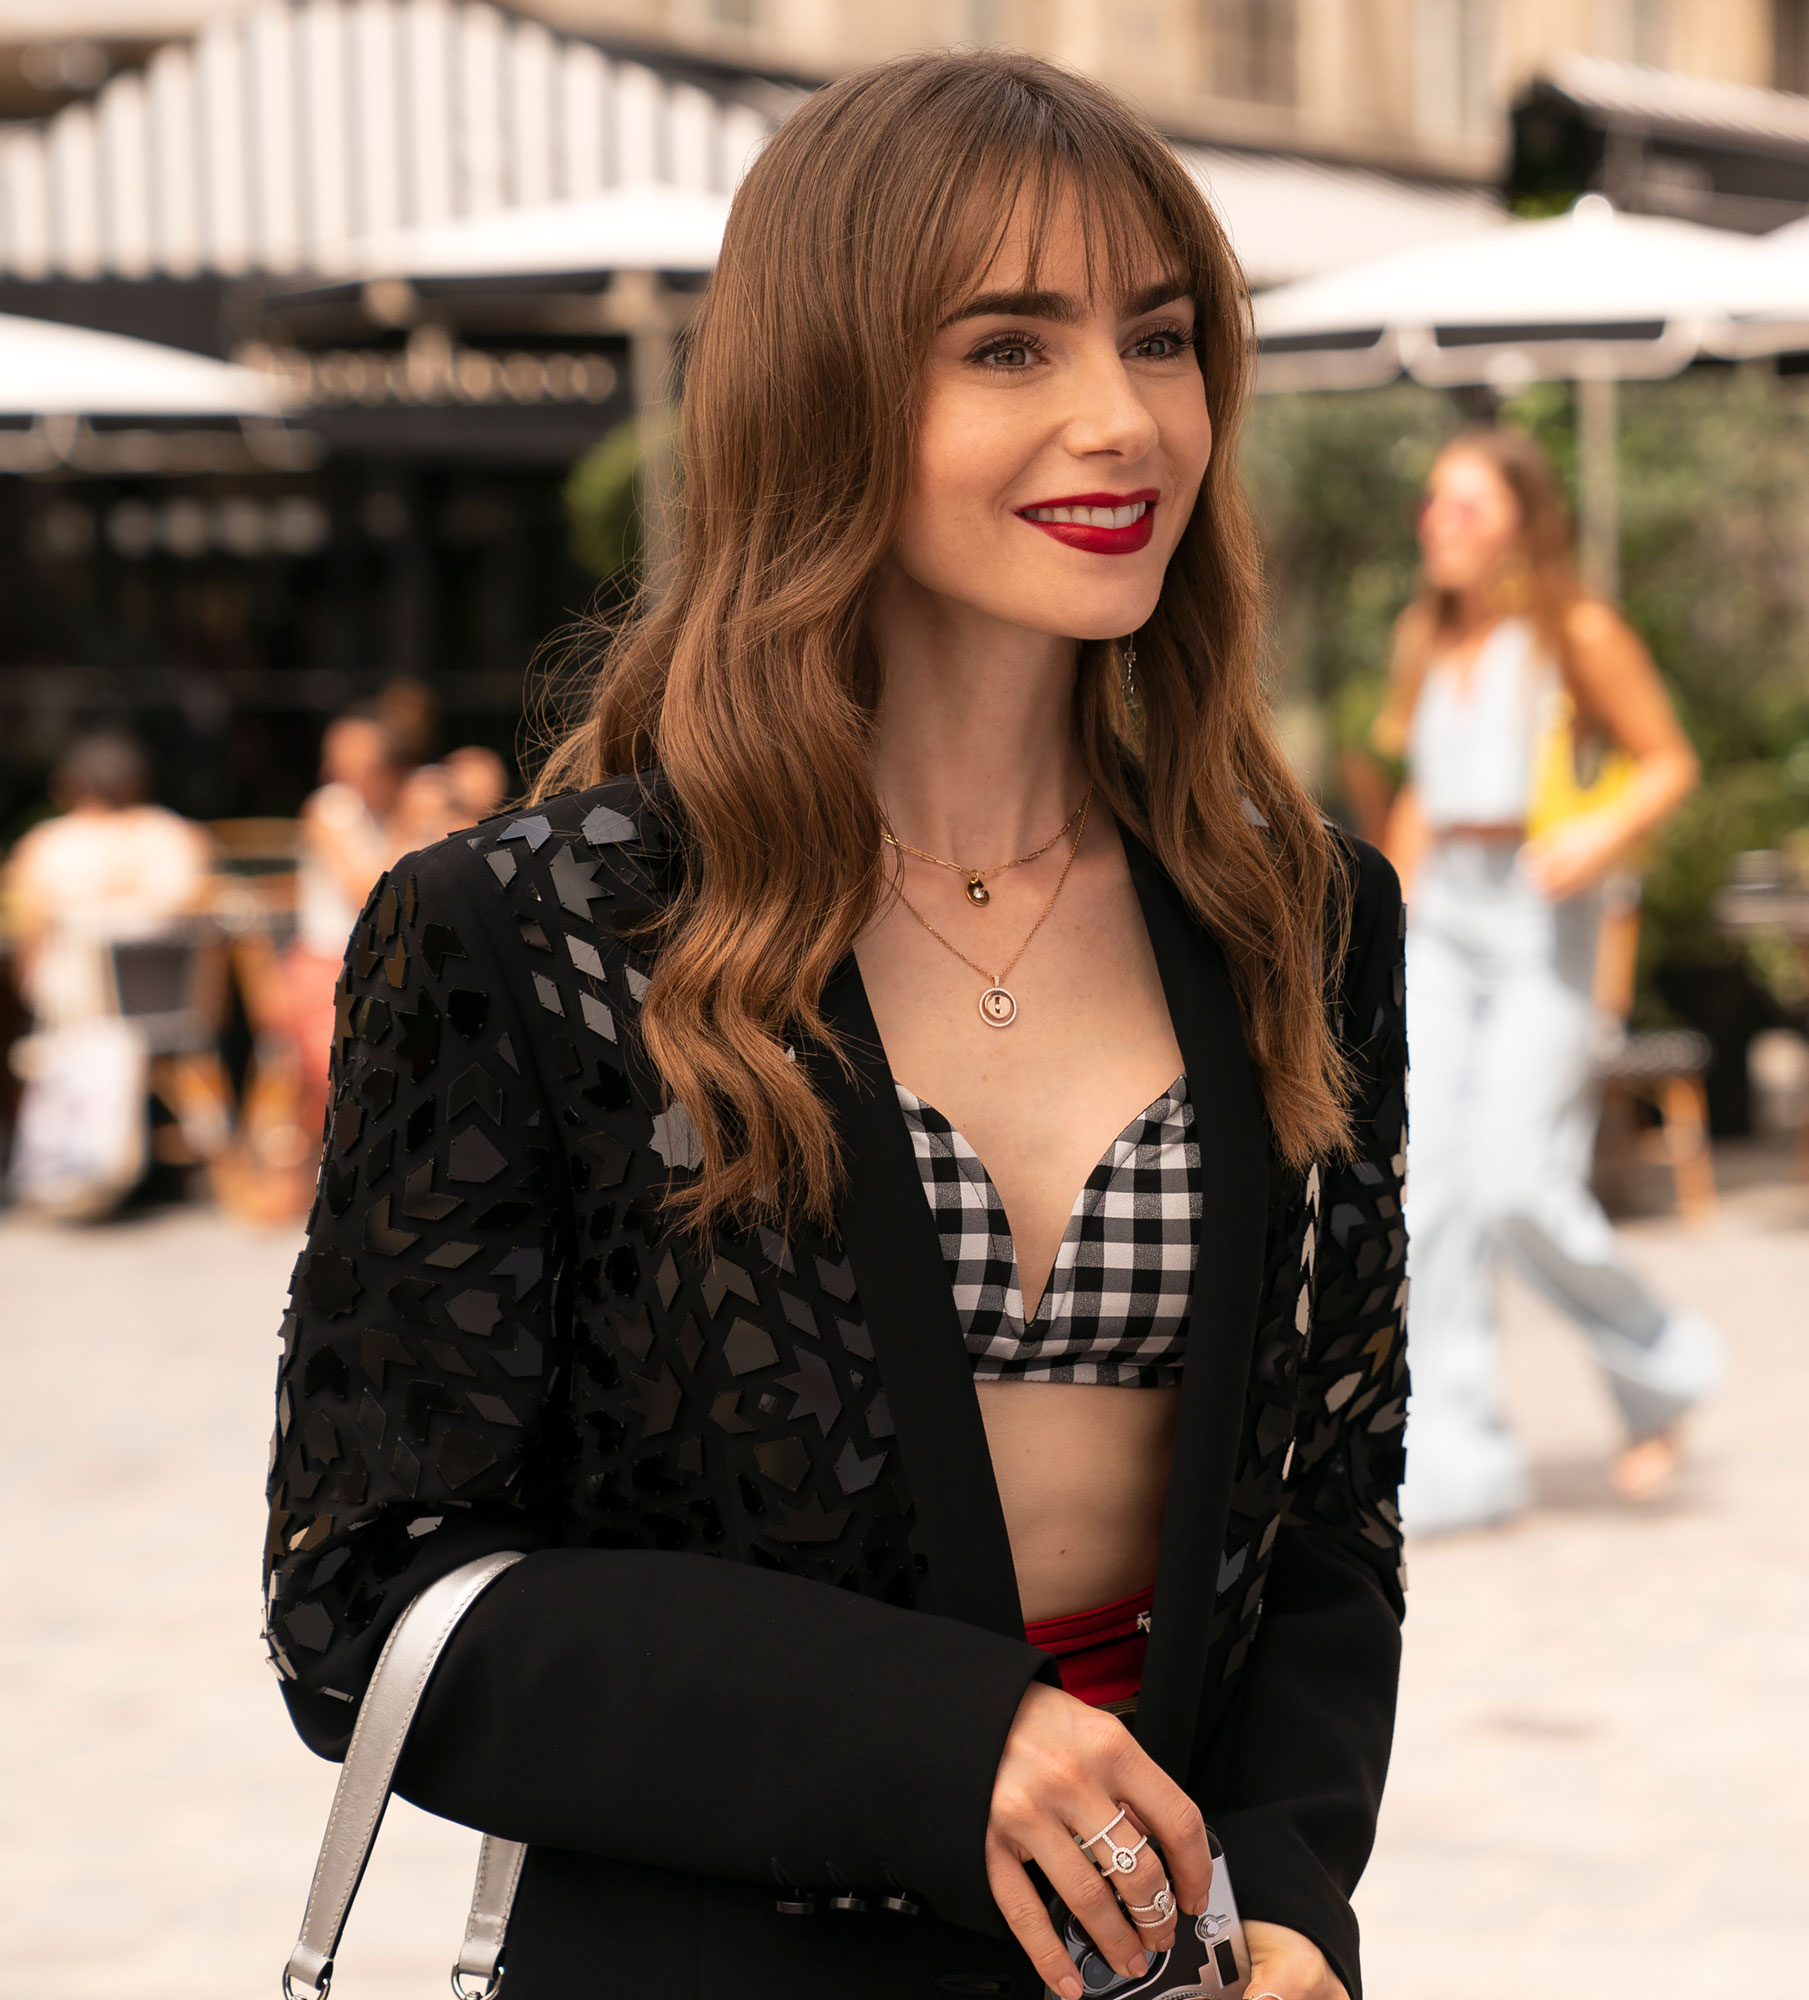 Emily in Paris Star Lily Collins Just Shared New Looks from Season